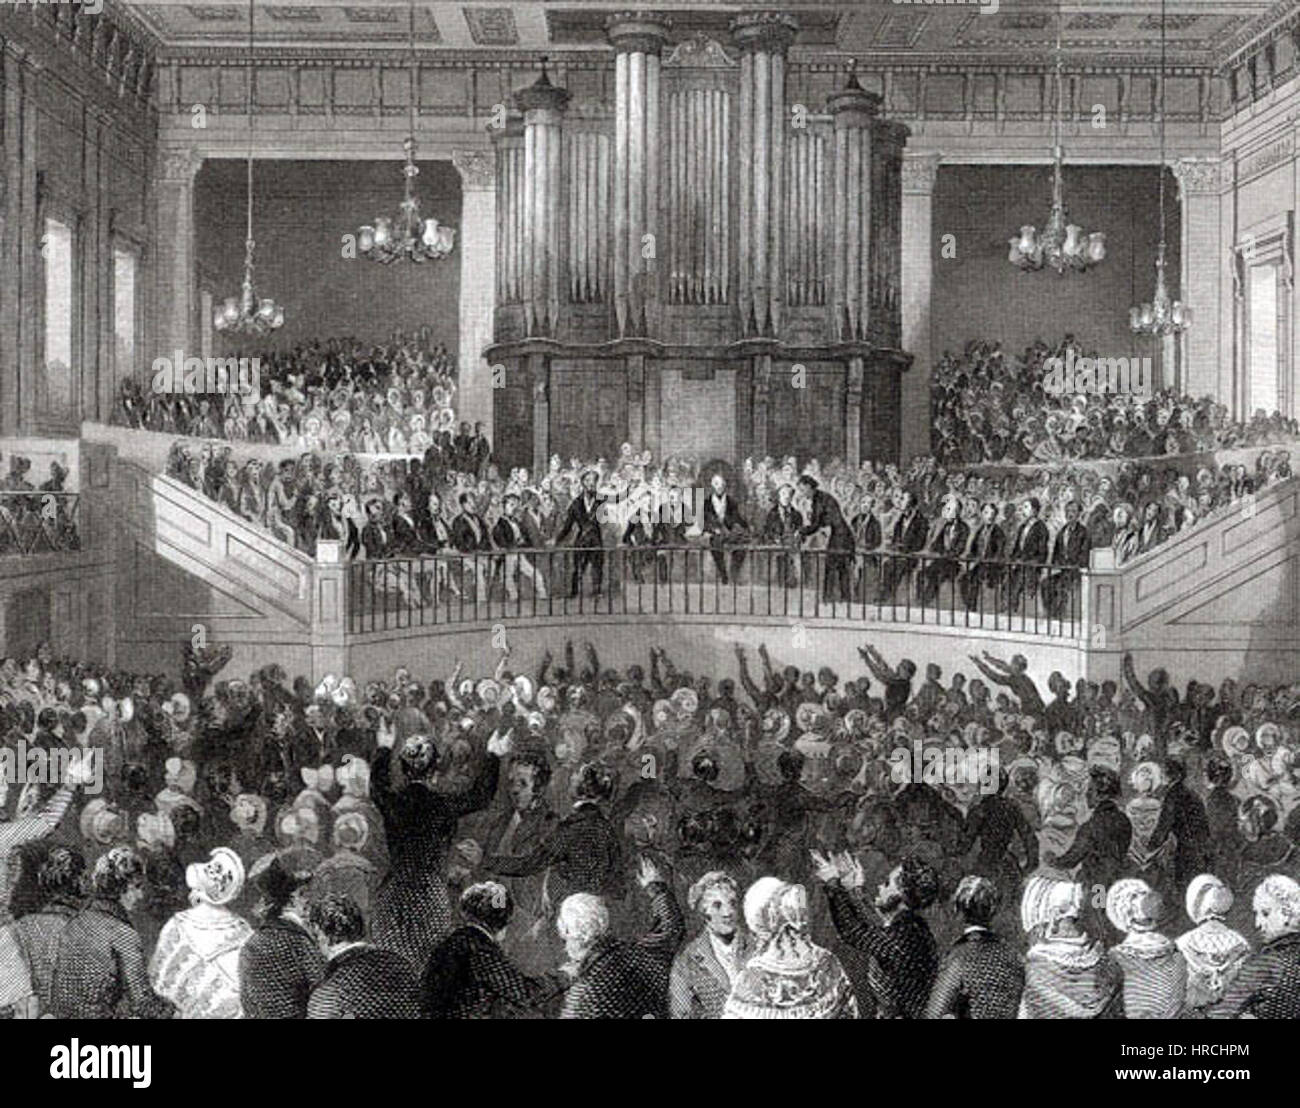 Royal Humane Society Meeting in Exeter Hall Stockfoto